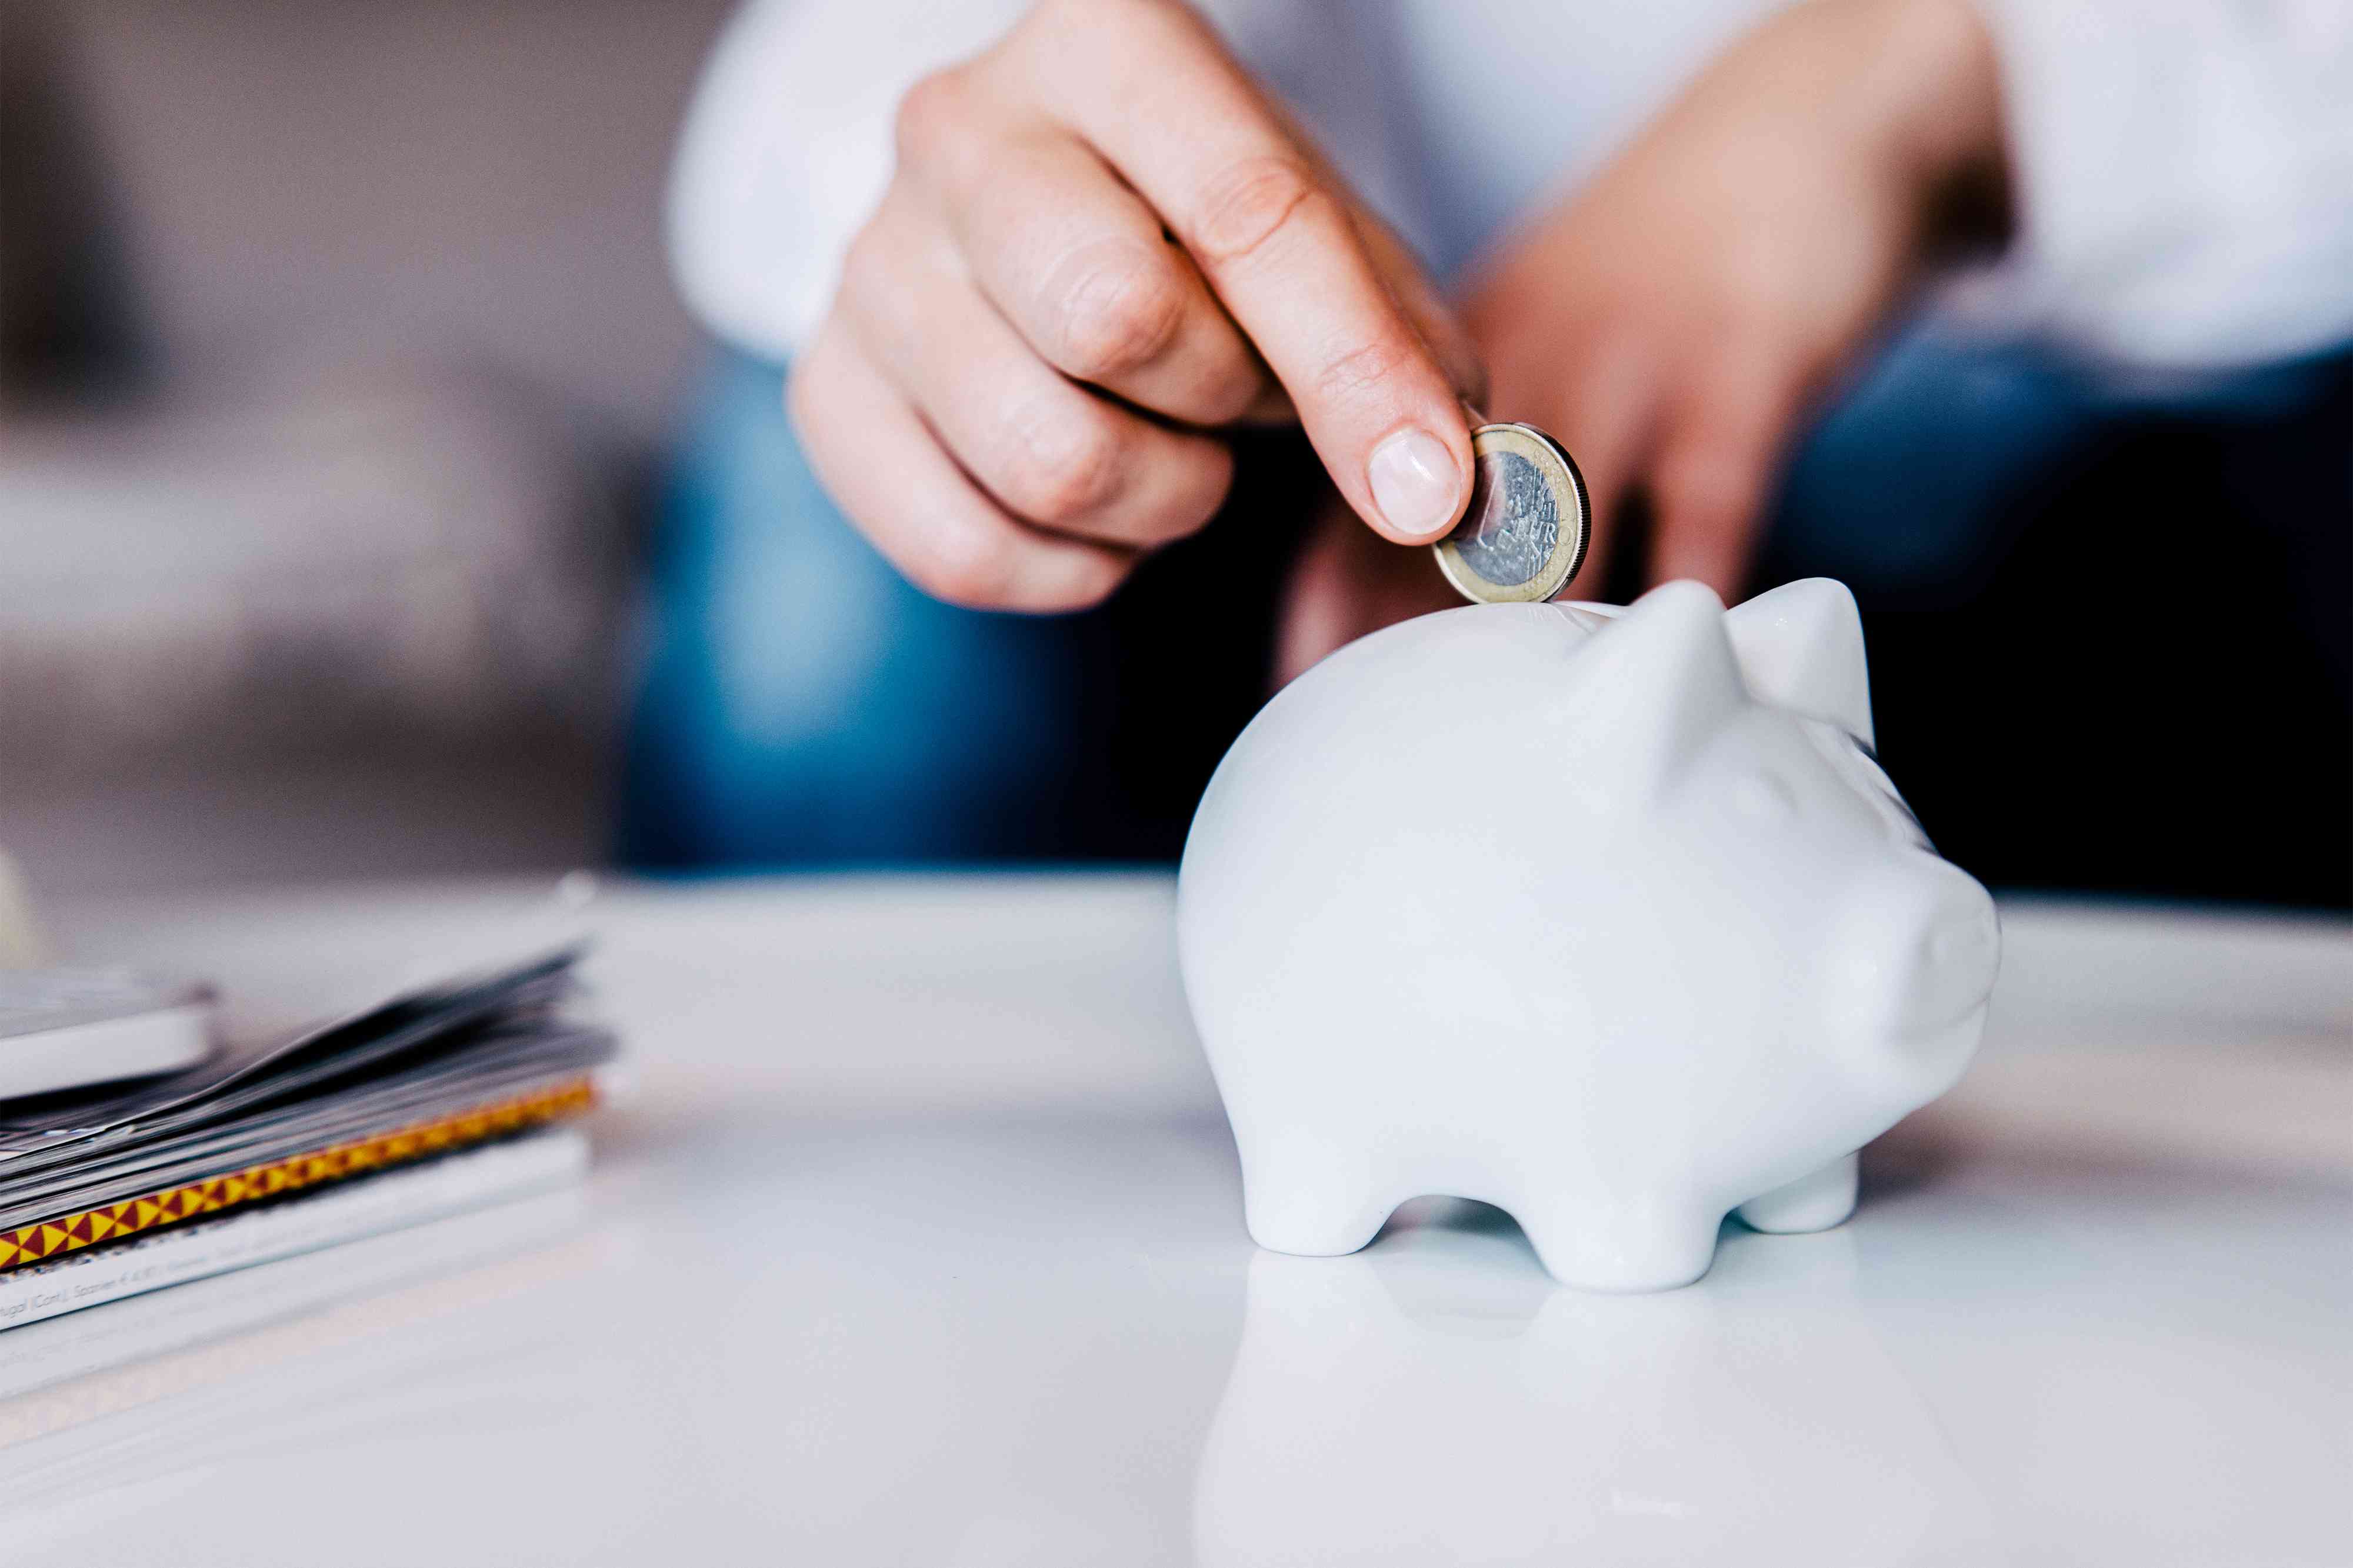 Putting a coin in a white piggy bank at home savings account concept